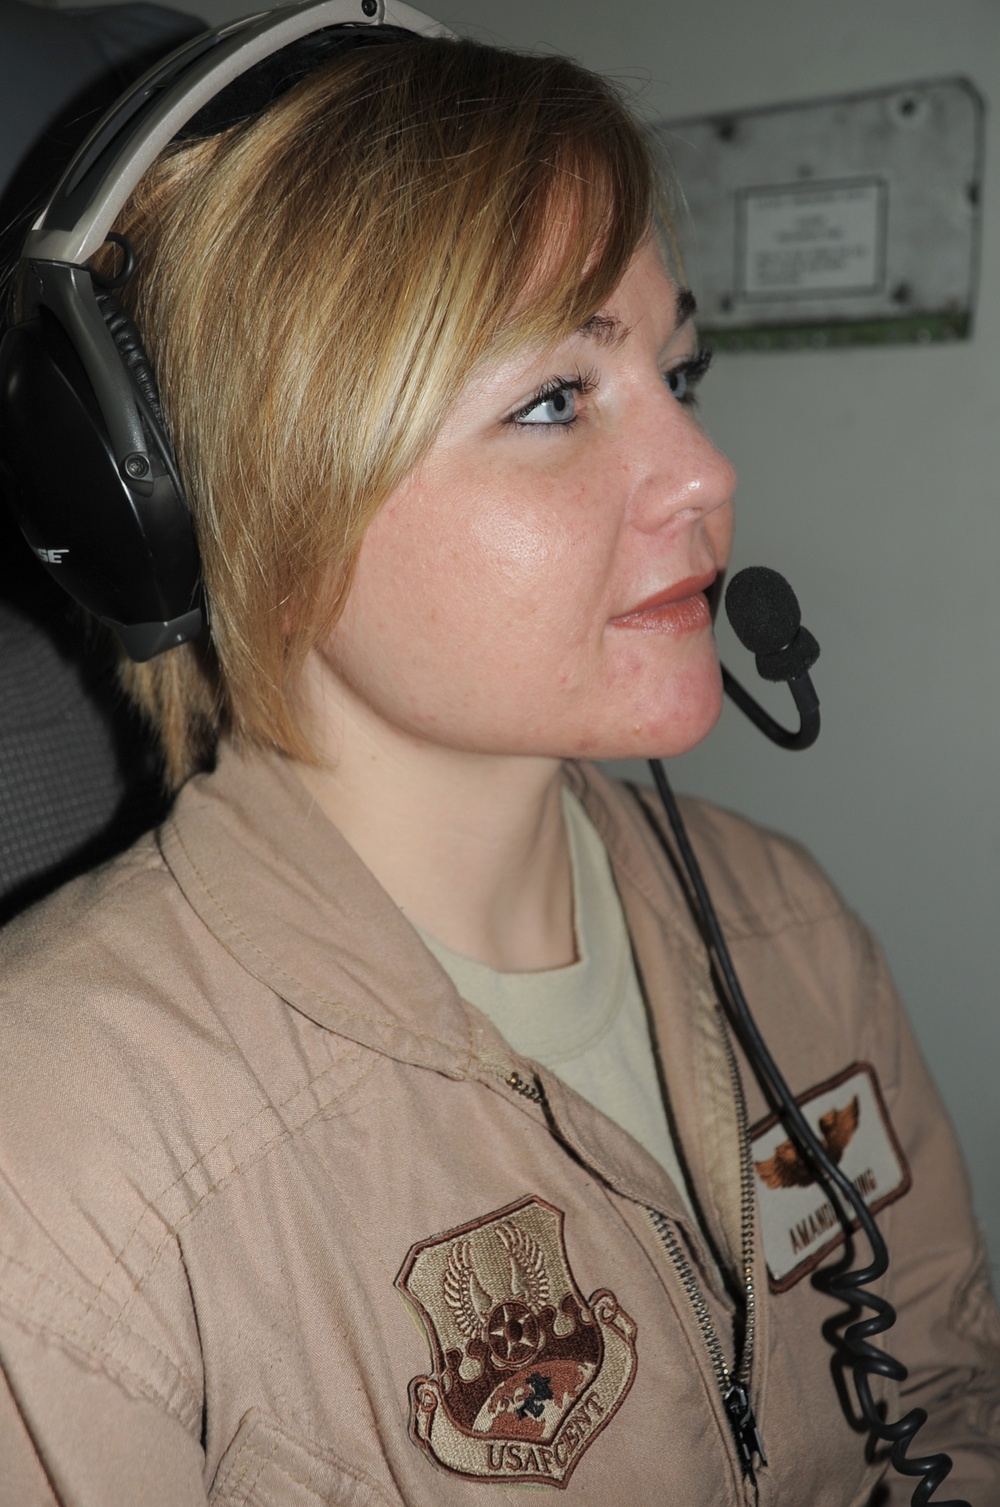 Tinker Captain, Austin Native, Serves As Air Surveillance Officer on AWACS Combat Air Missions in Southwest Asia